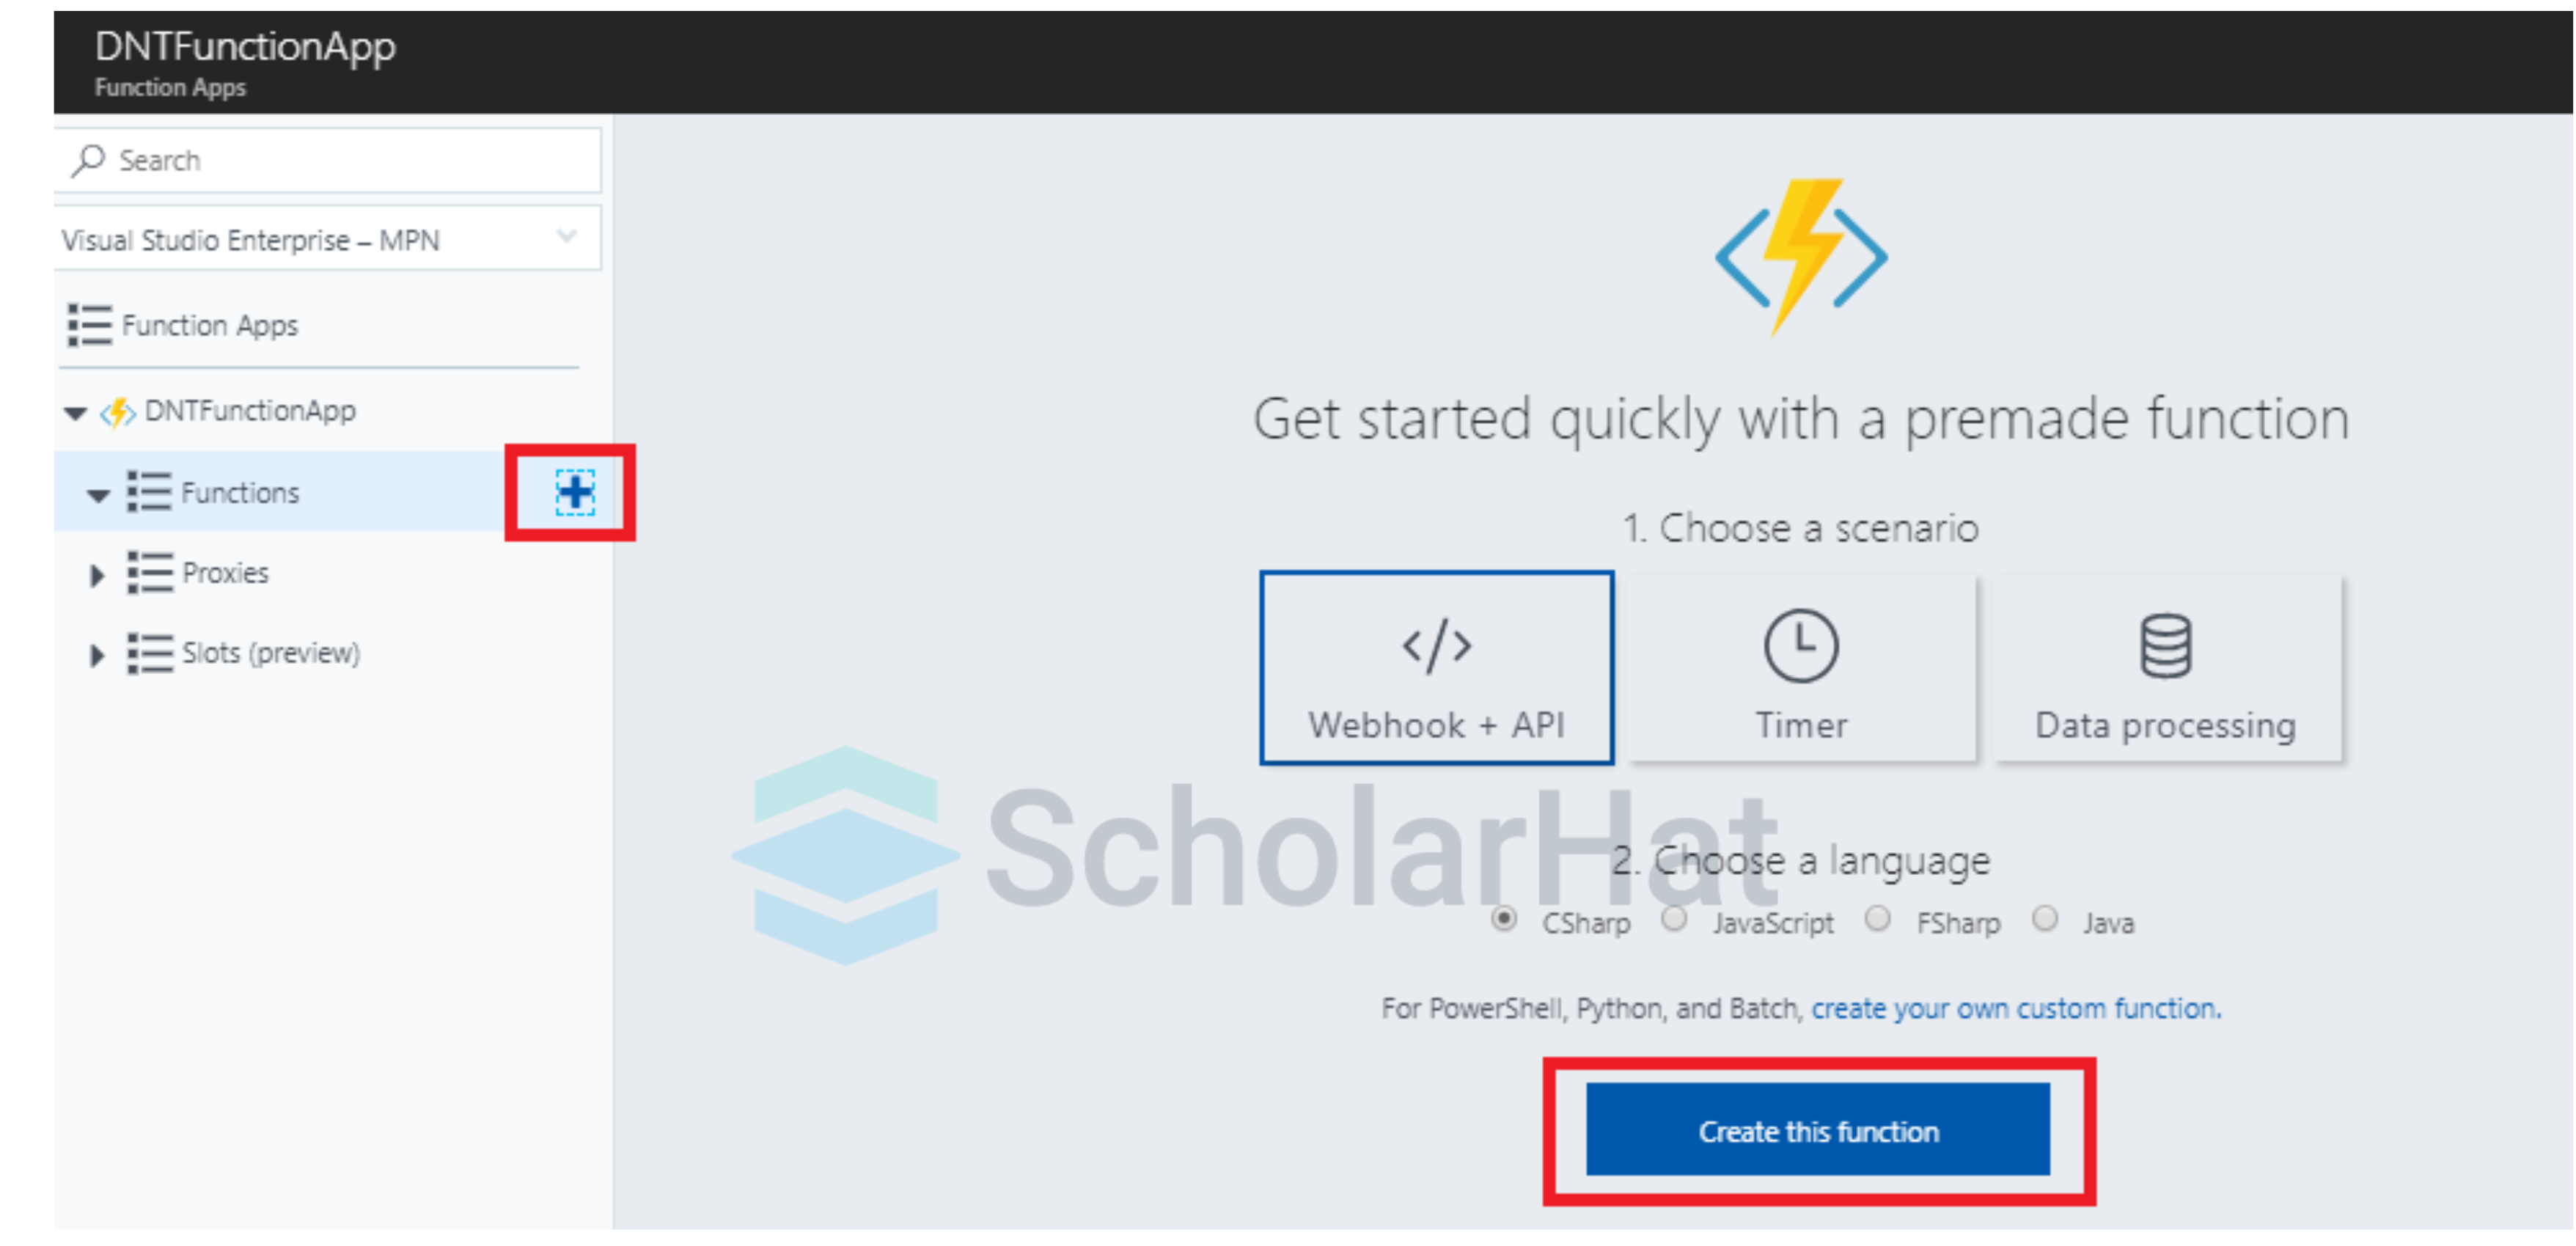 Click on the add (+) symbol to add an Azure function